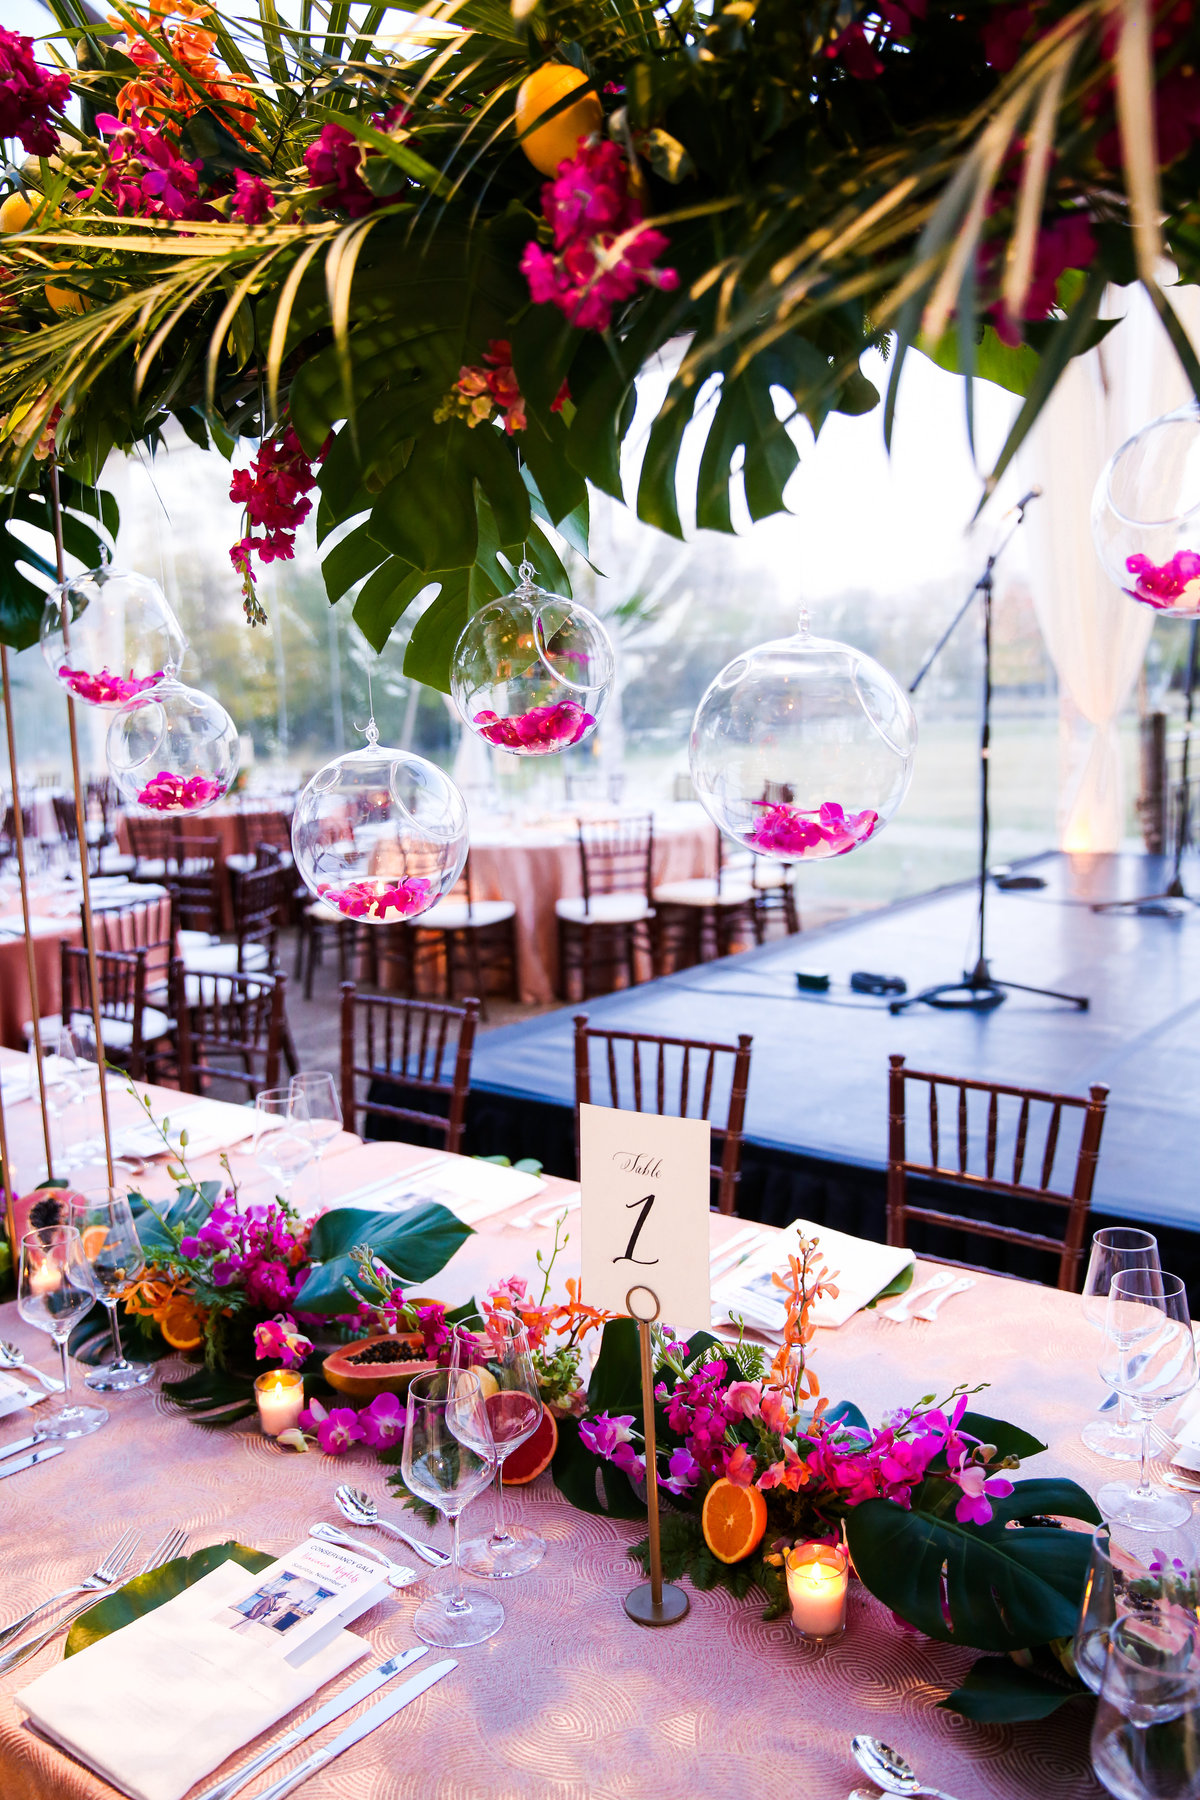 Conservancy Gala 2019 - Details  (61 of 237)